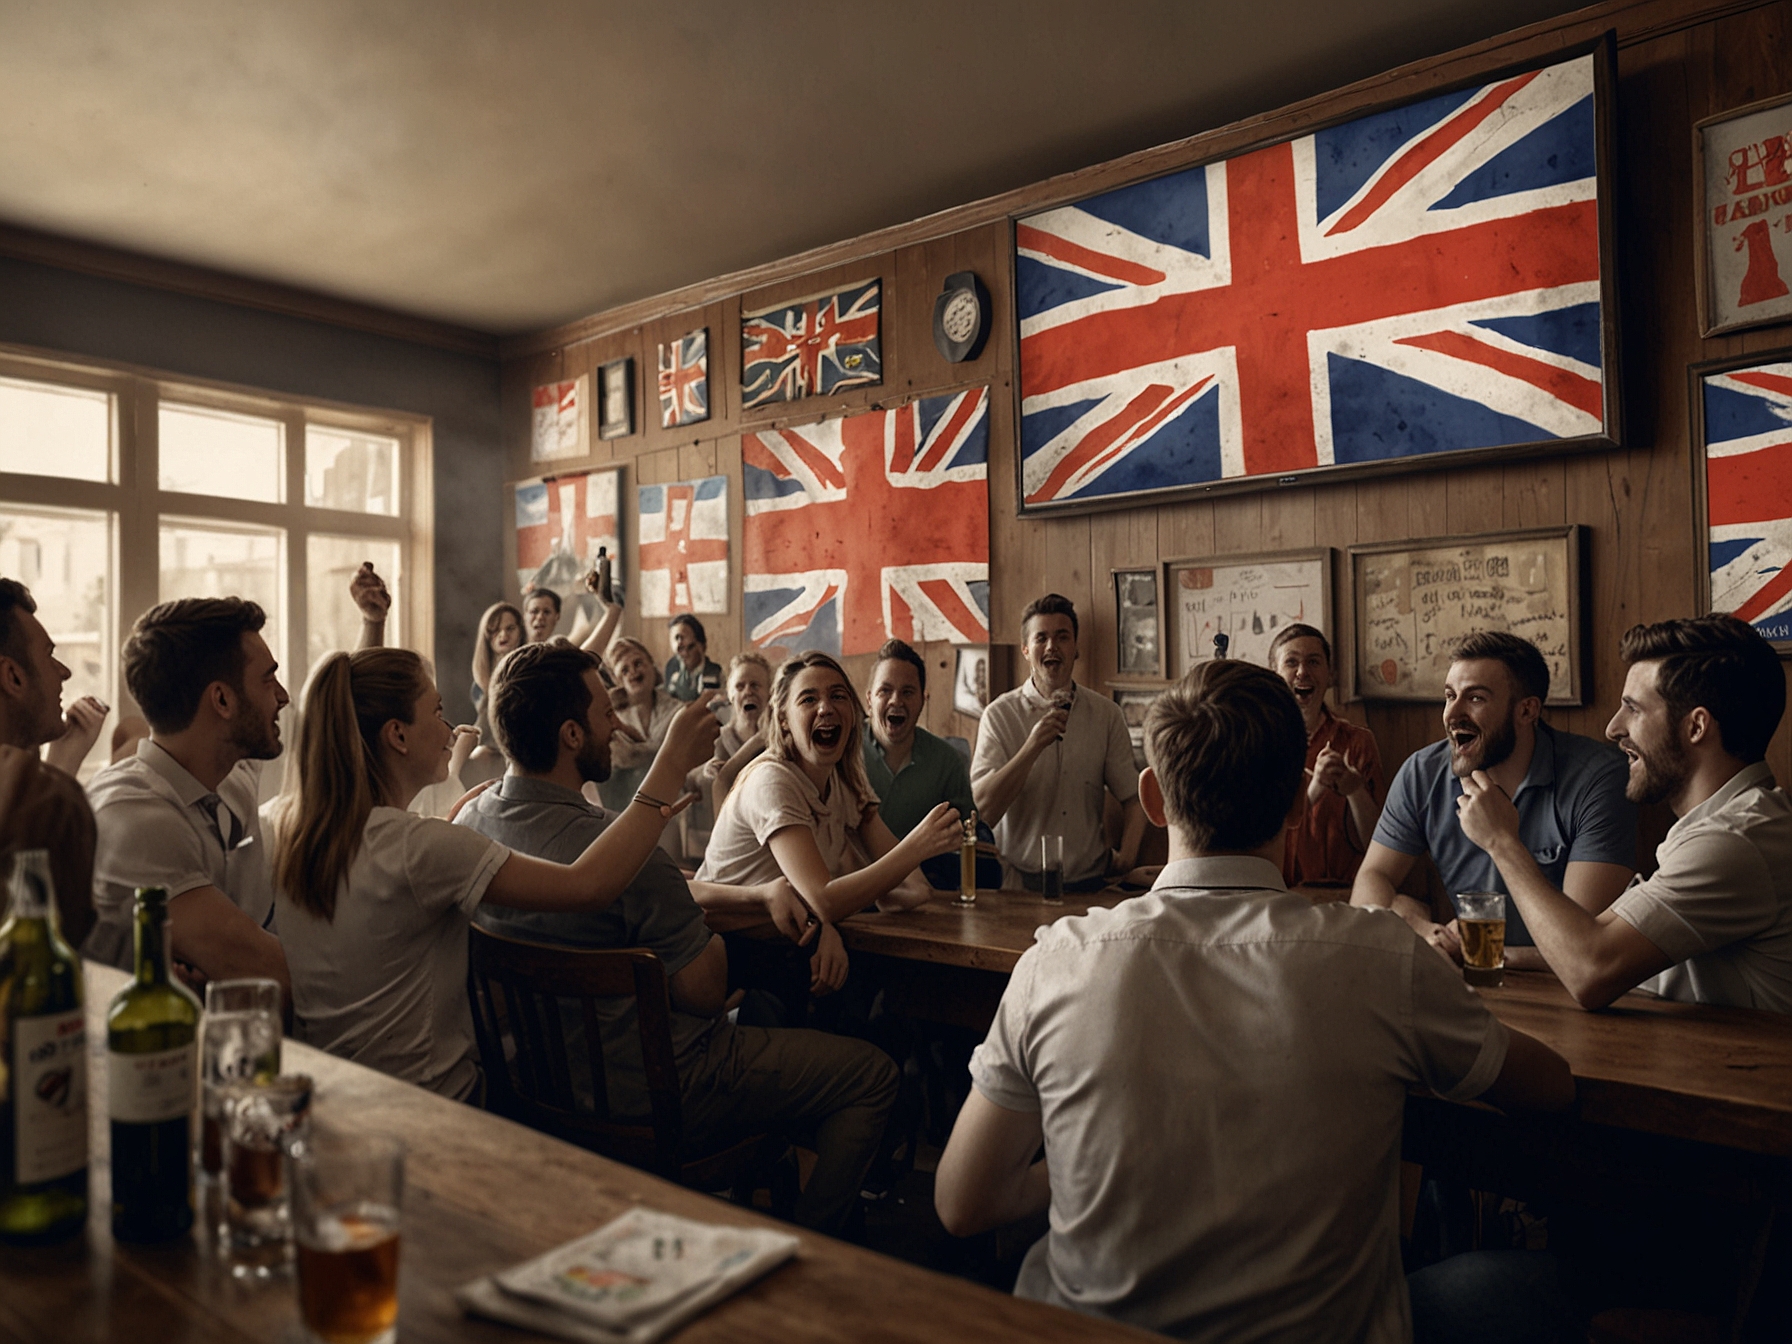 Fans in a Munich bar gathered around a big screen TV, adorned with English flags, passionately cheering and showing camaraderie as they anticipate the critical match.